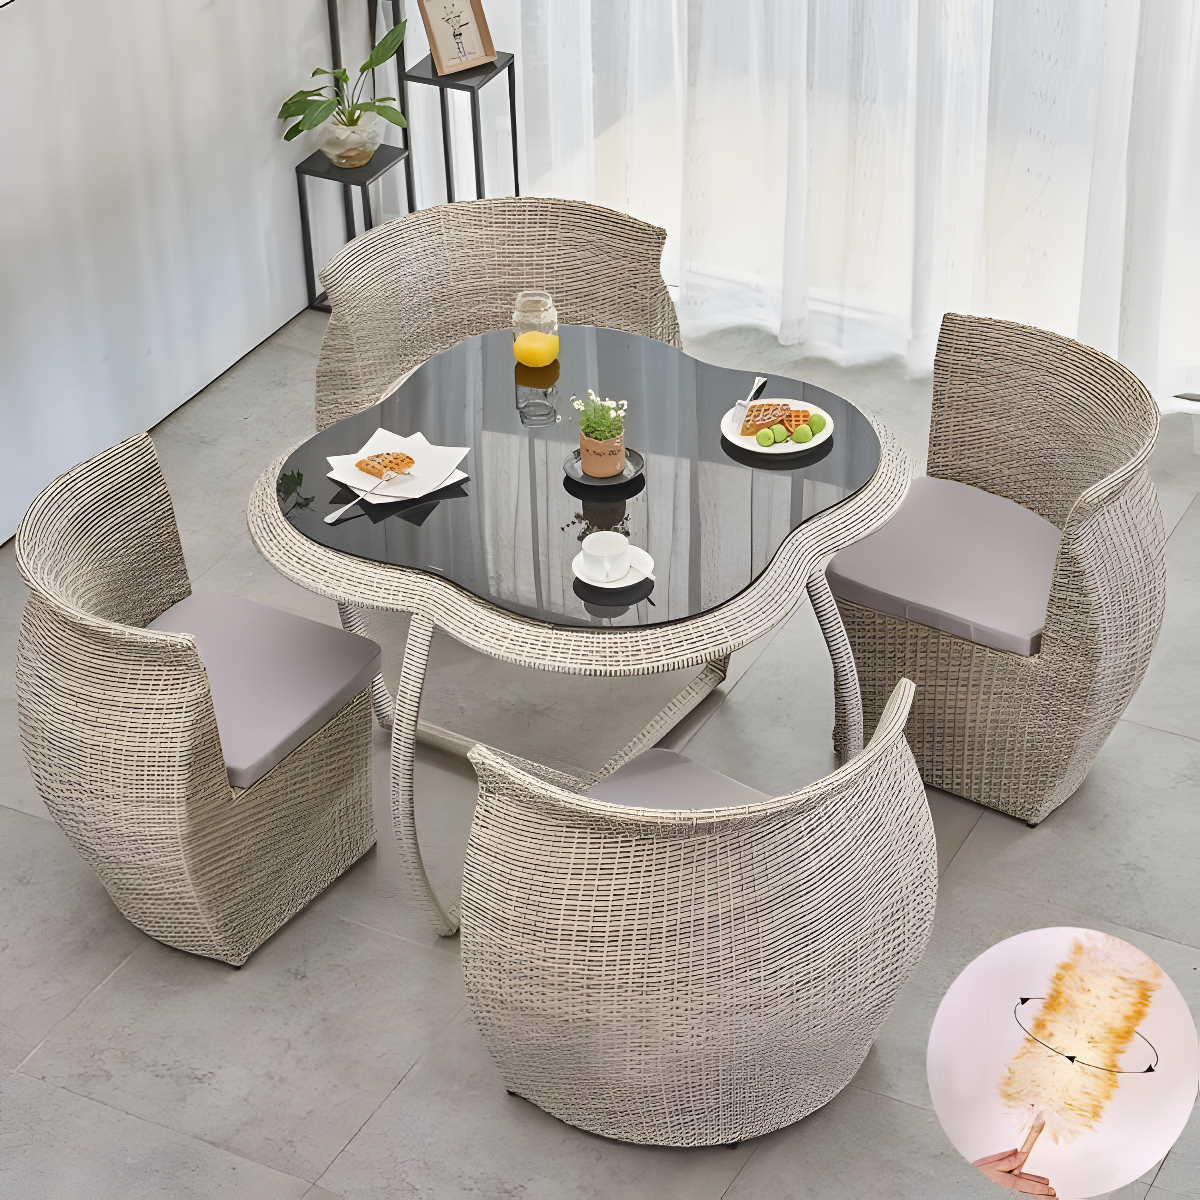 New in 2022，5-piece Patio Furniture dining room combination🔥🔥🔥Factory promotion, limited quantity🔥🔥free shipping🔥